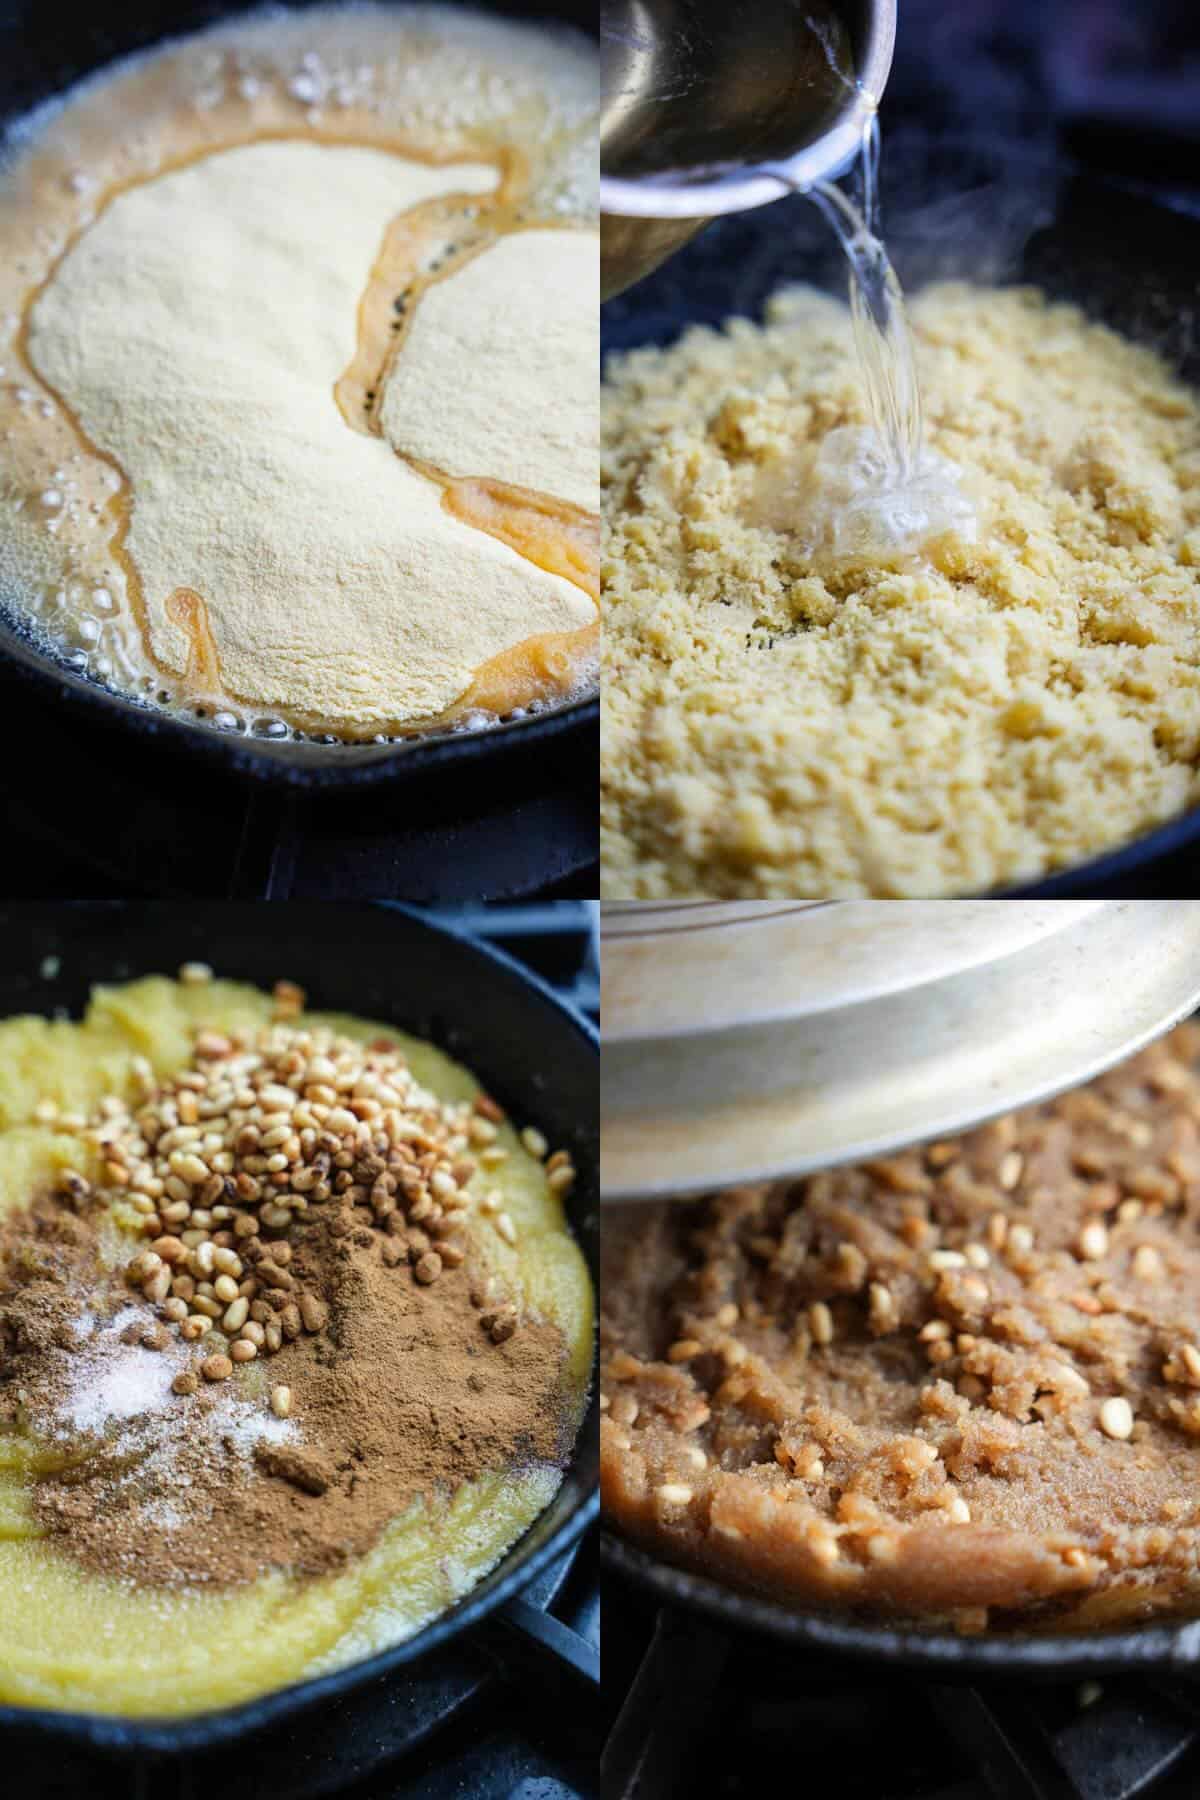 A series of photos illustrating the step-by-step process of making Irmik helvasi.